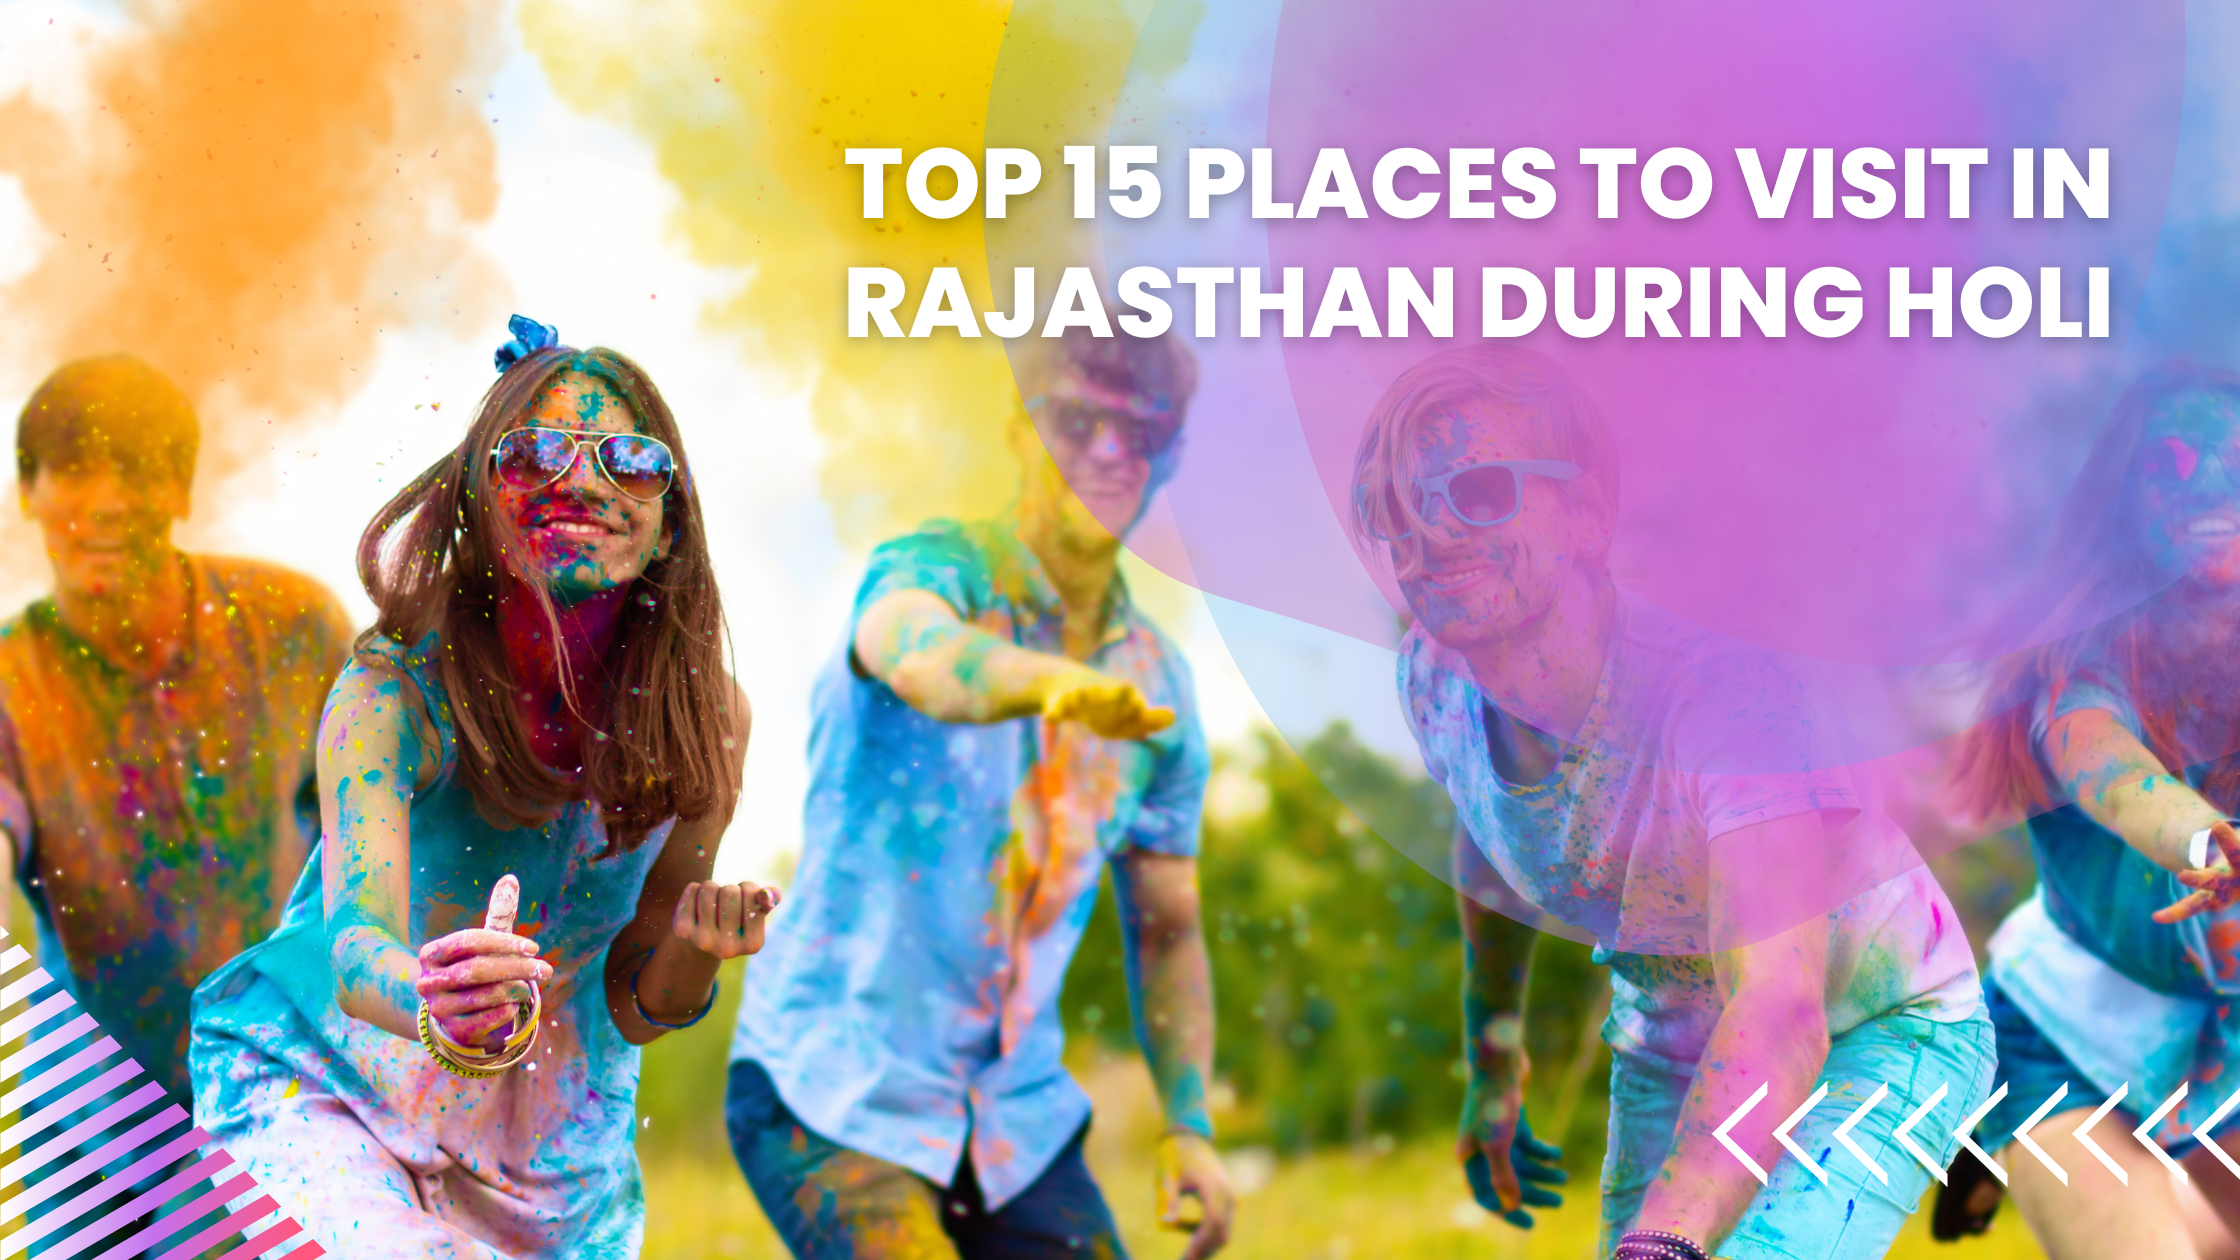 Top 15 places to visit in Rajasthan during Holi